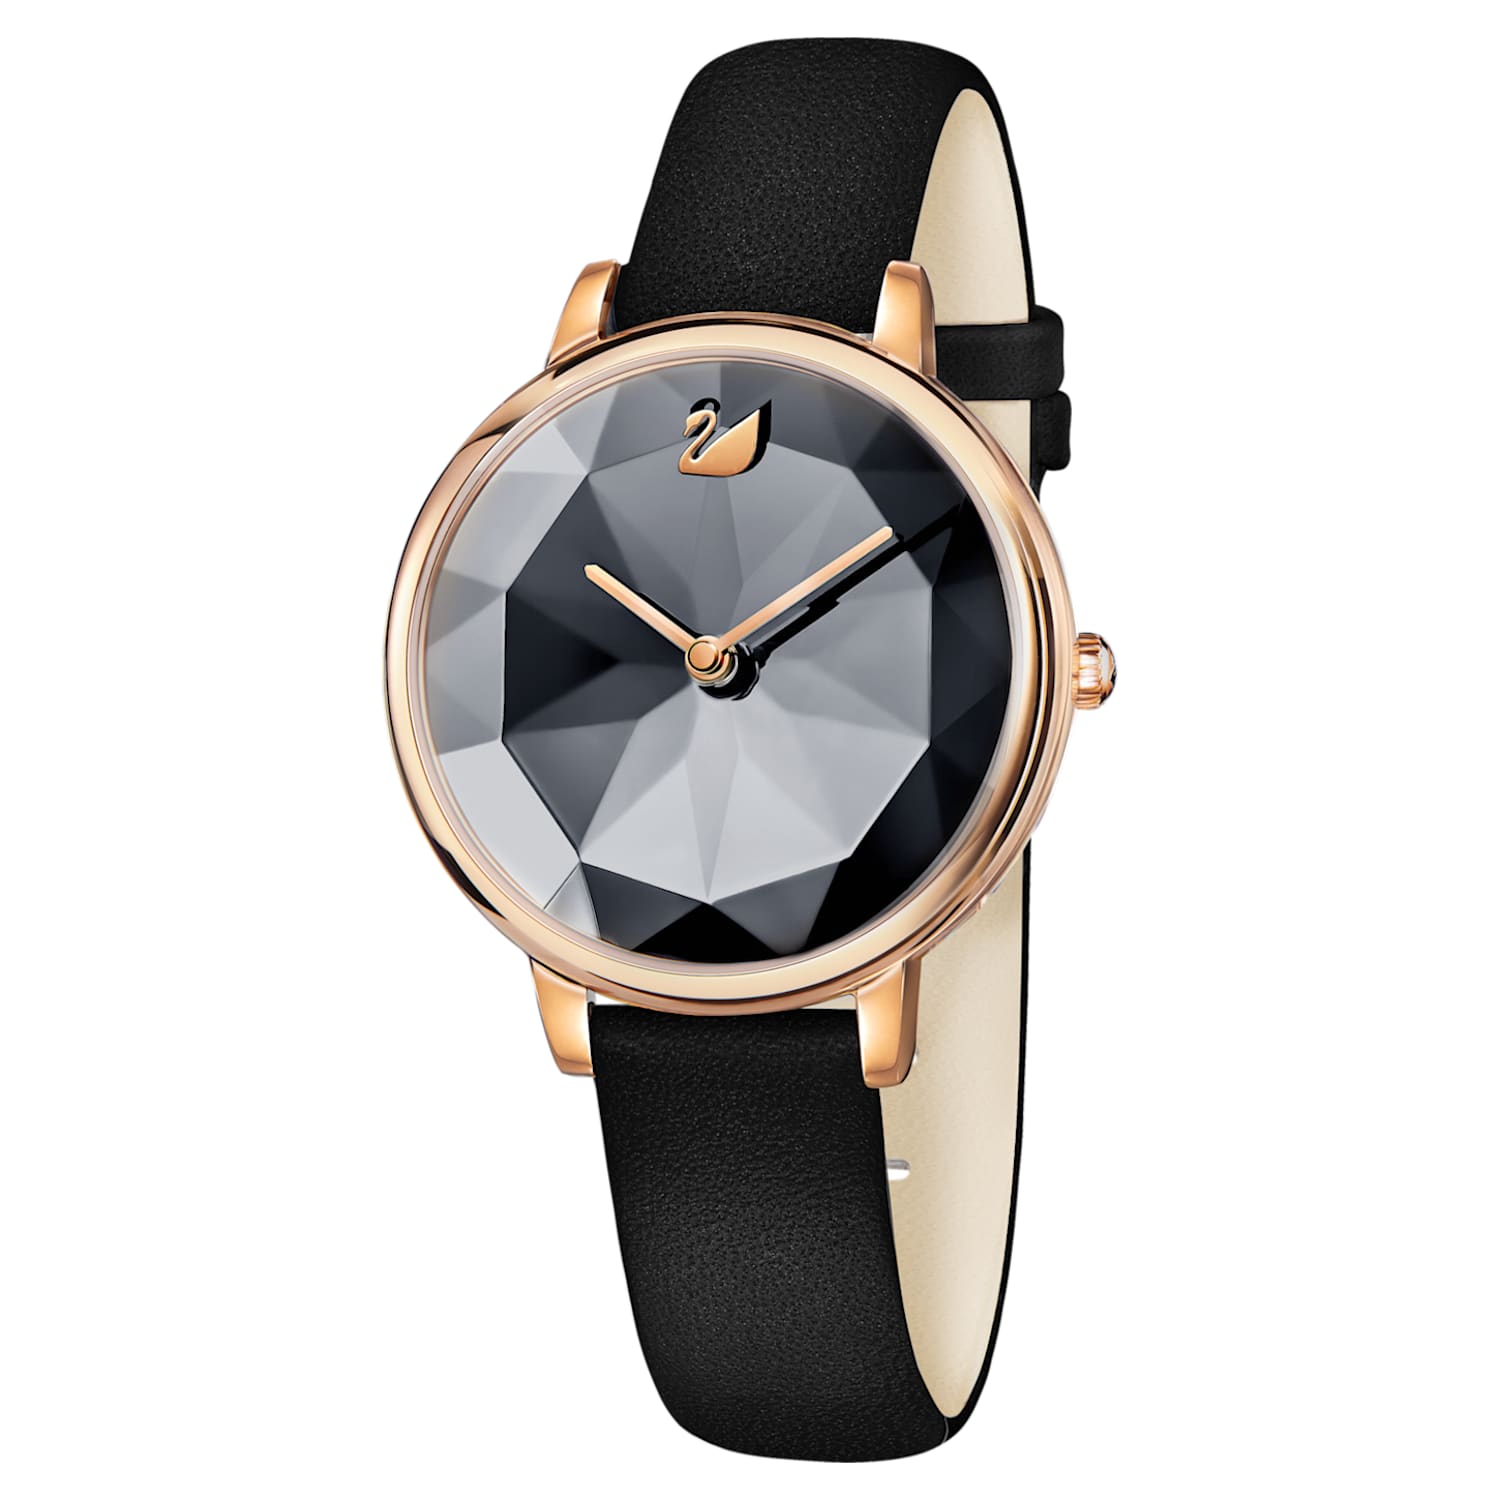 Crystal Lake Watch, Leather strap, Black, Rose-gold tone PVD